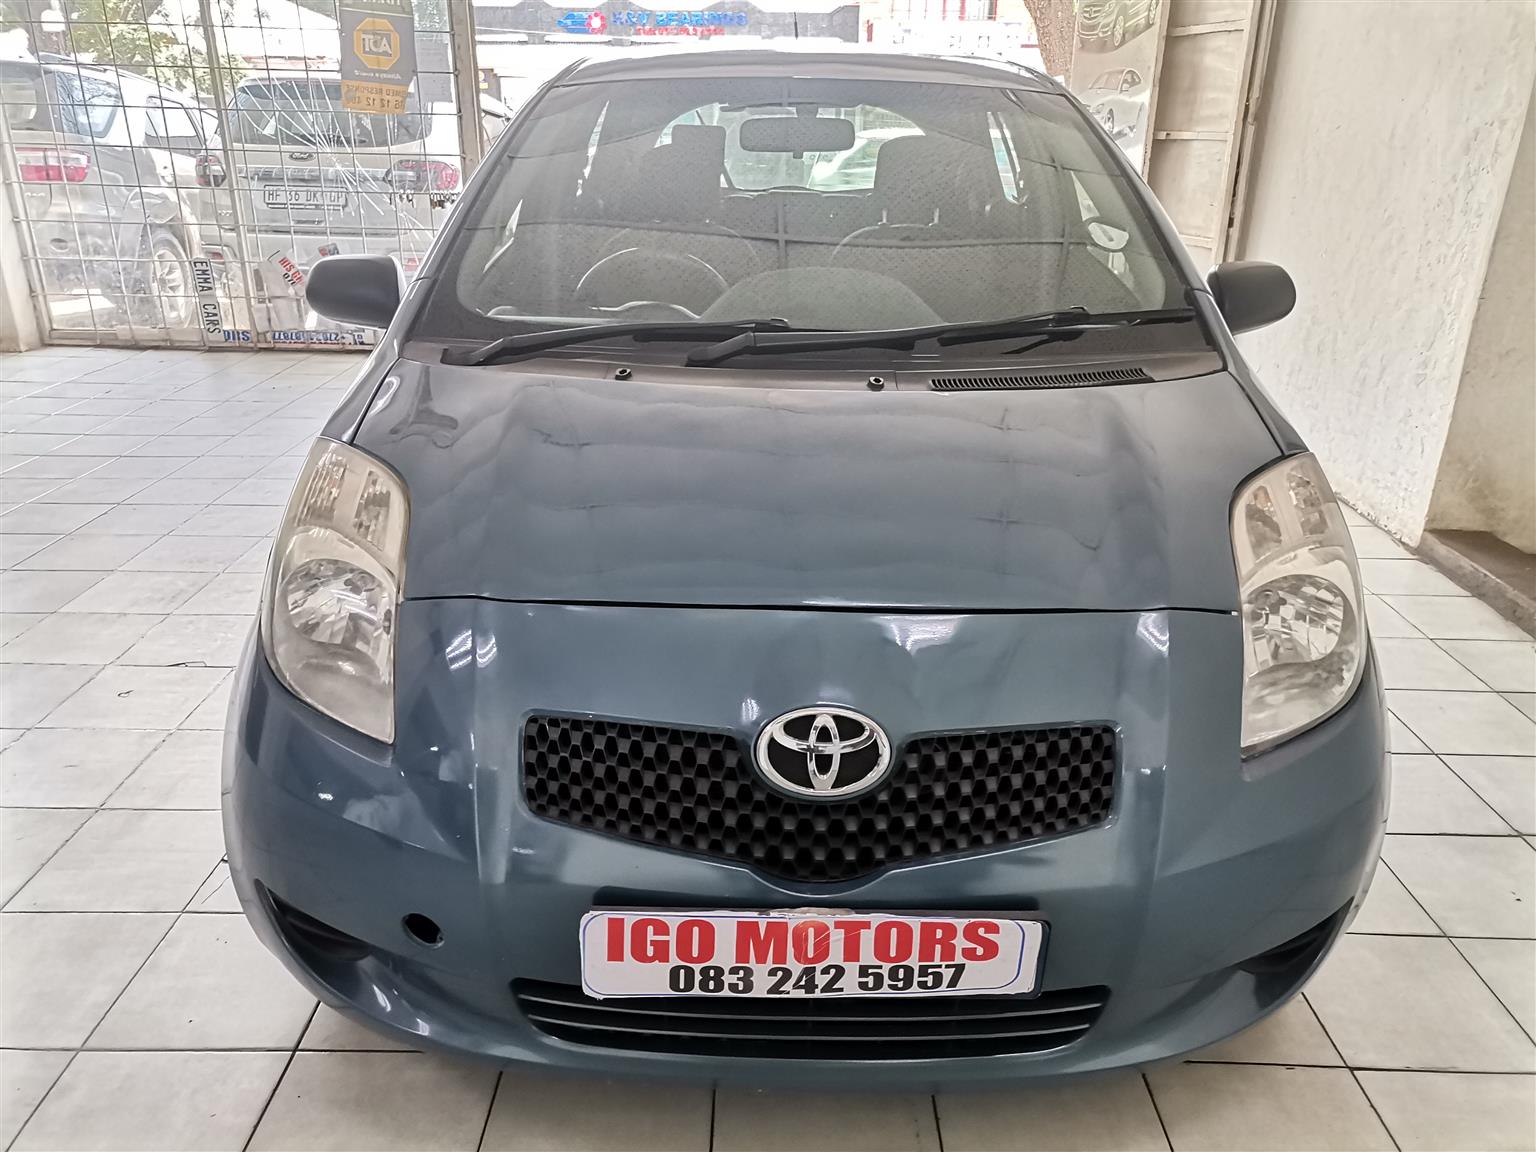 2008 TOYOTA YARIS 1.3 T3 MANUAL Mechanically perfect with Clothes Seat